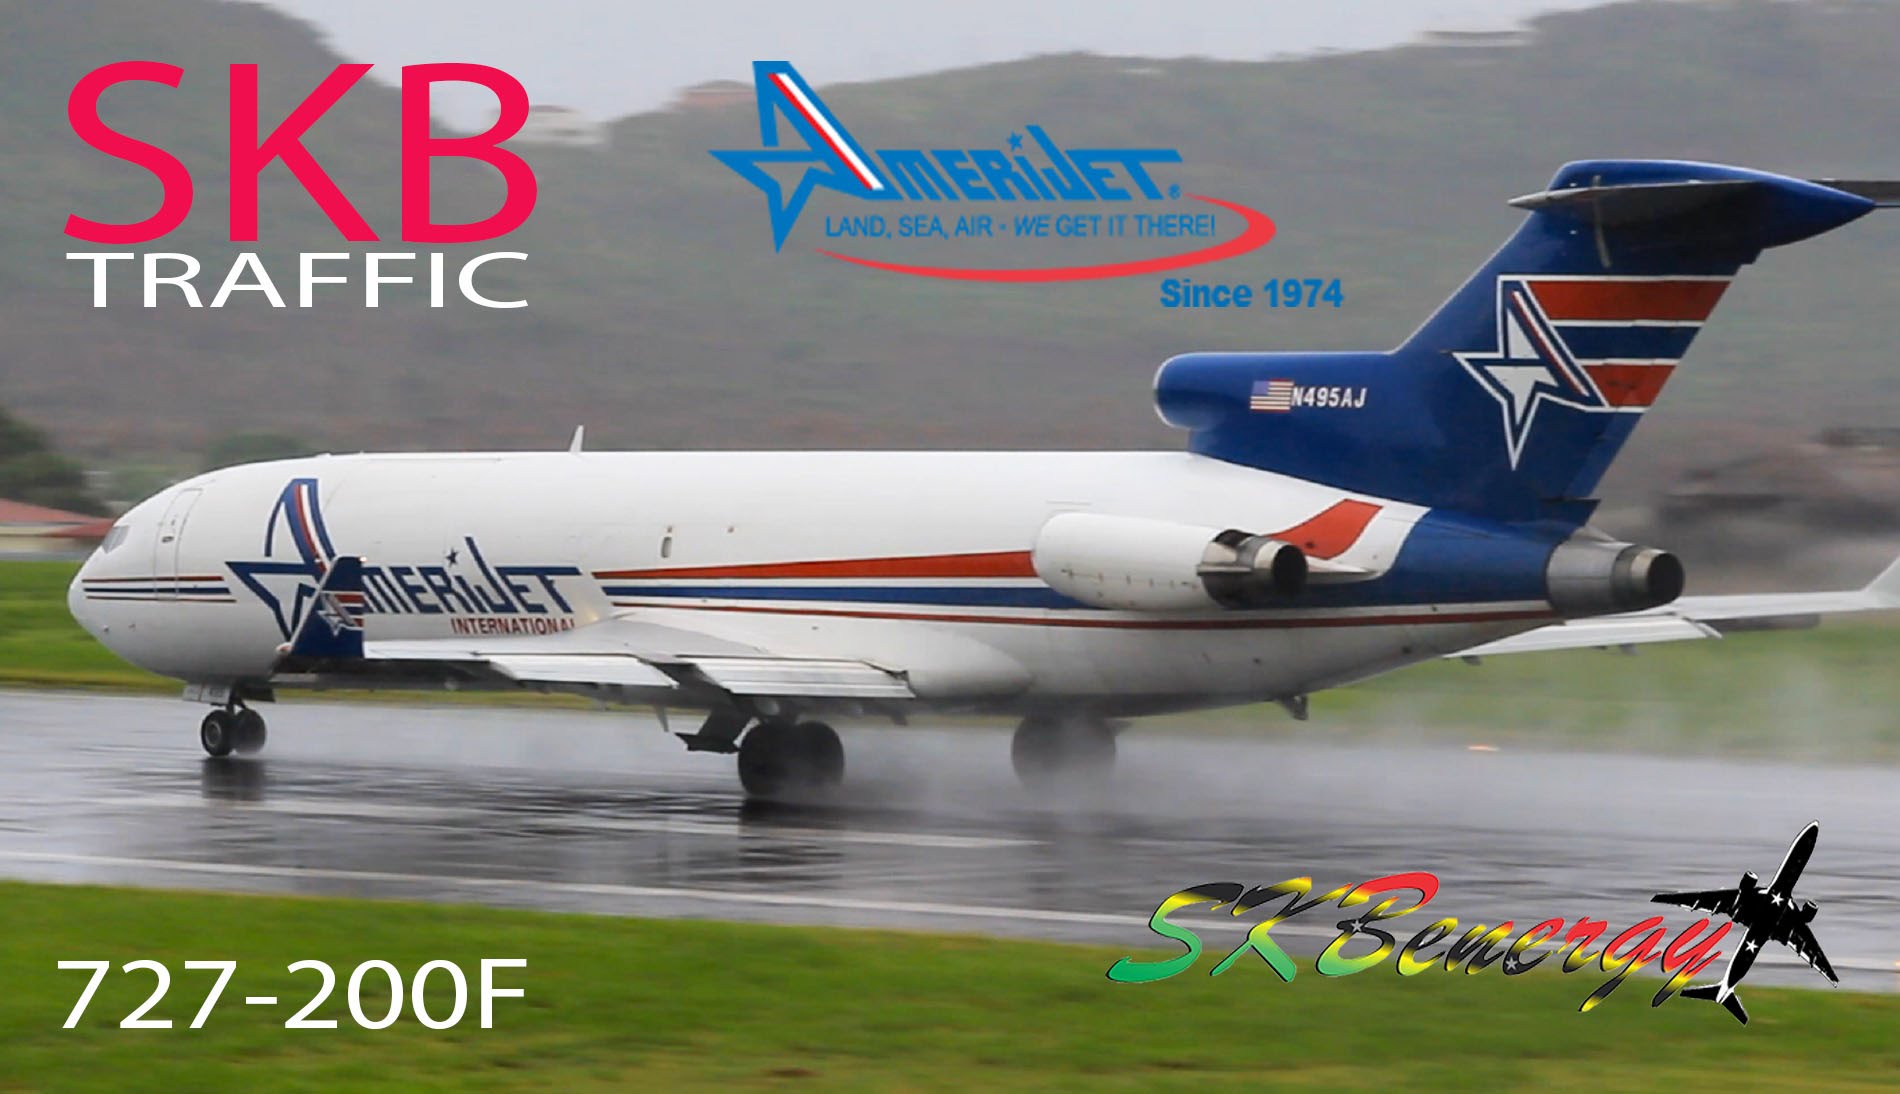 Amerijet International Is Your Best Bet For Shipping In The Caribbean ... Why Ship By Boat When You Don't Have To!